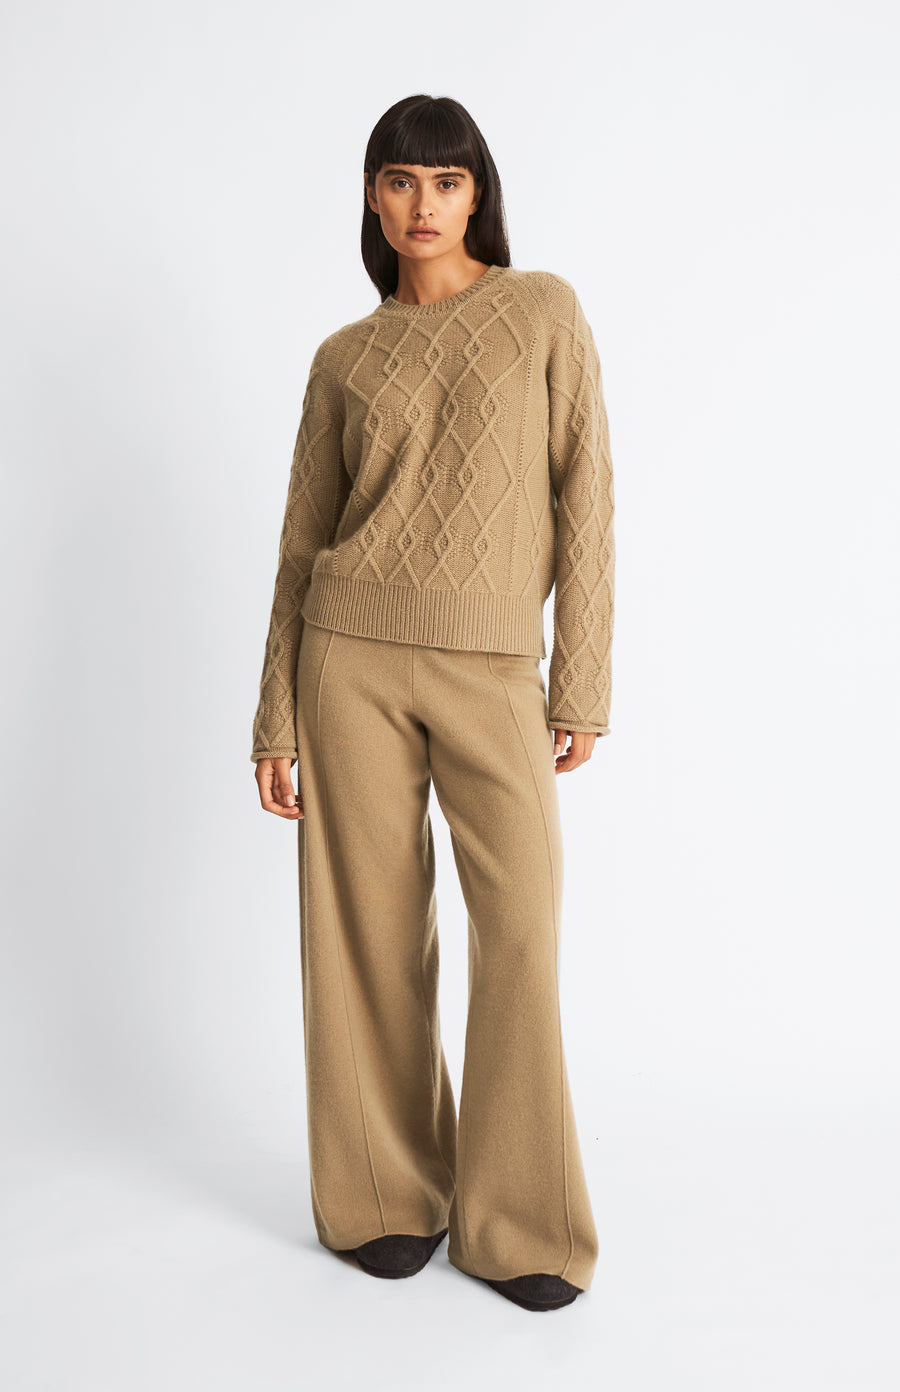 Pringle of Scotland Women's Cashmere Blend wide-leg Trousers In Camel on model with matching top